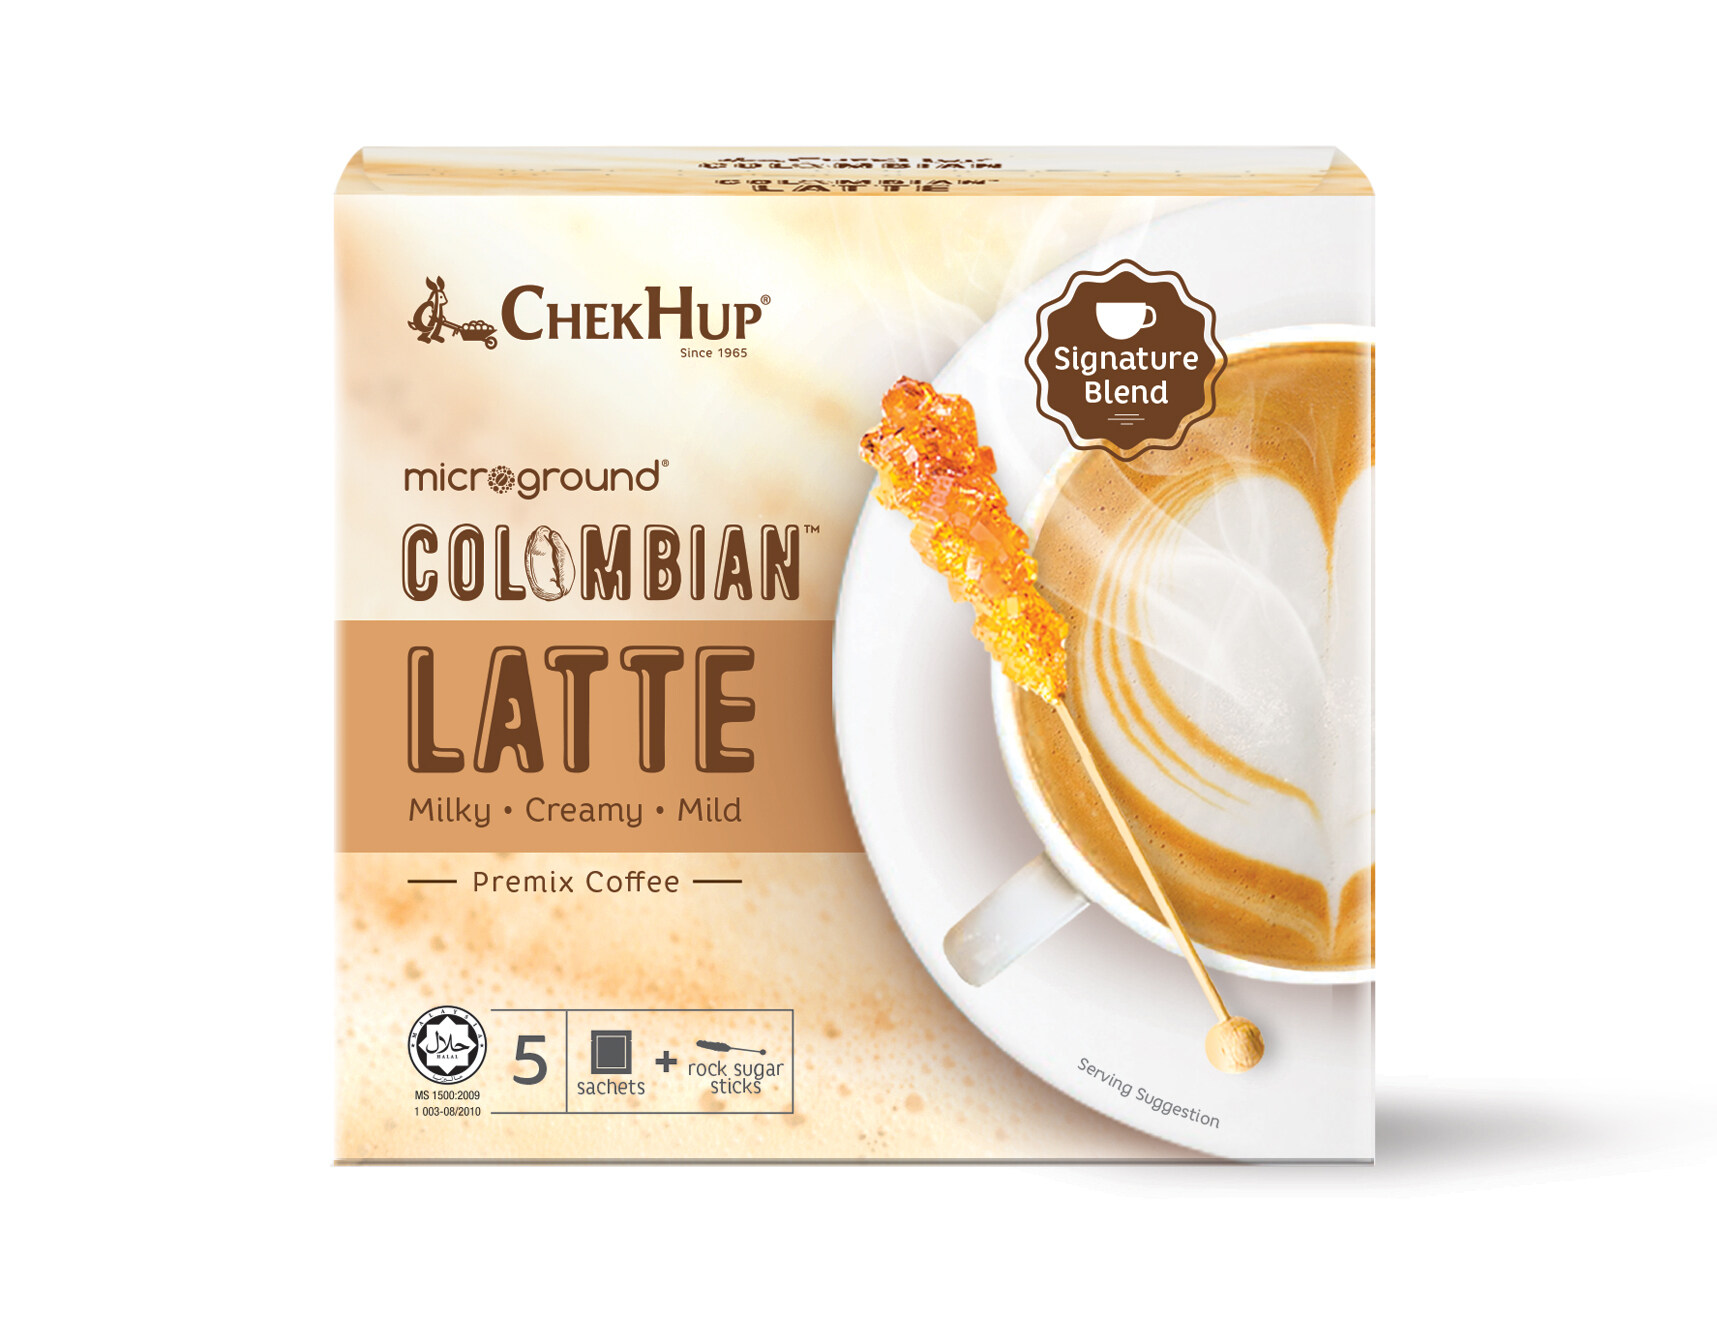 Chek Hup Microground Colombian Latte (23g x 6s) [Bundle of 12]